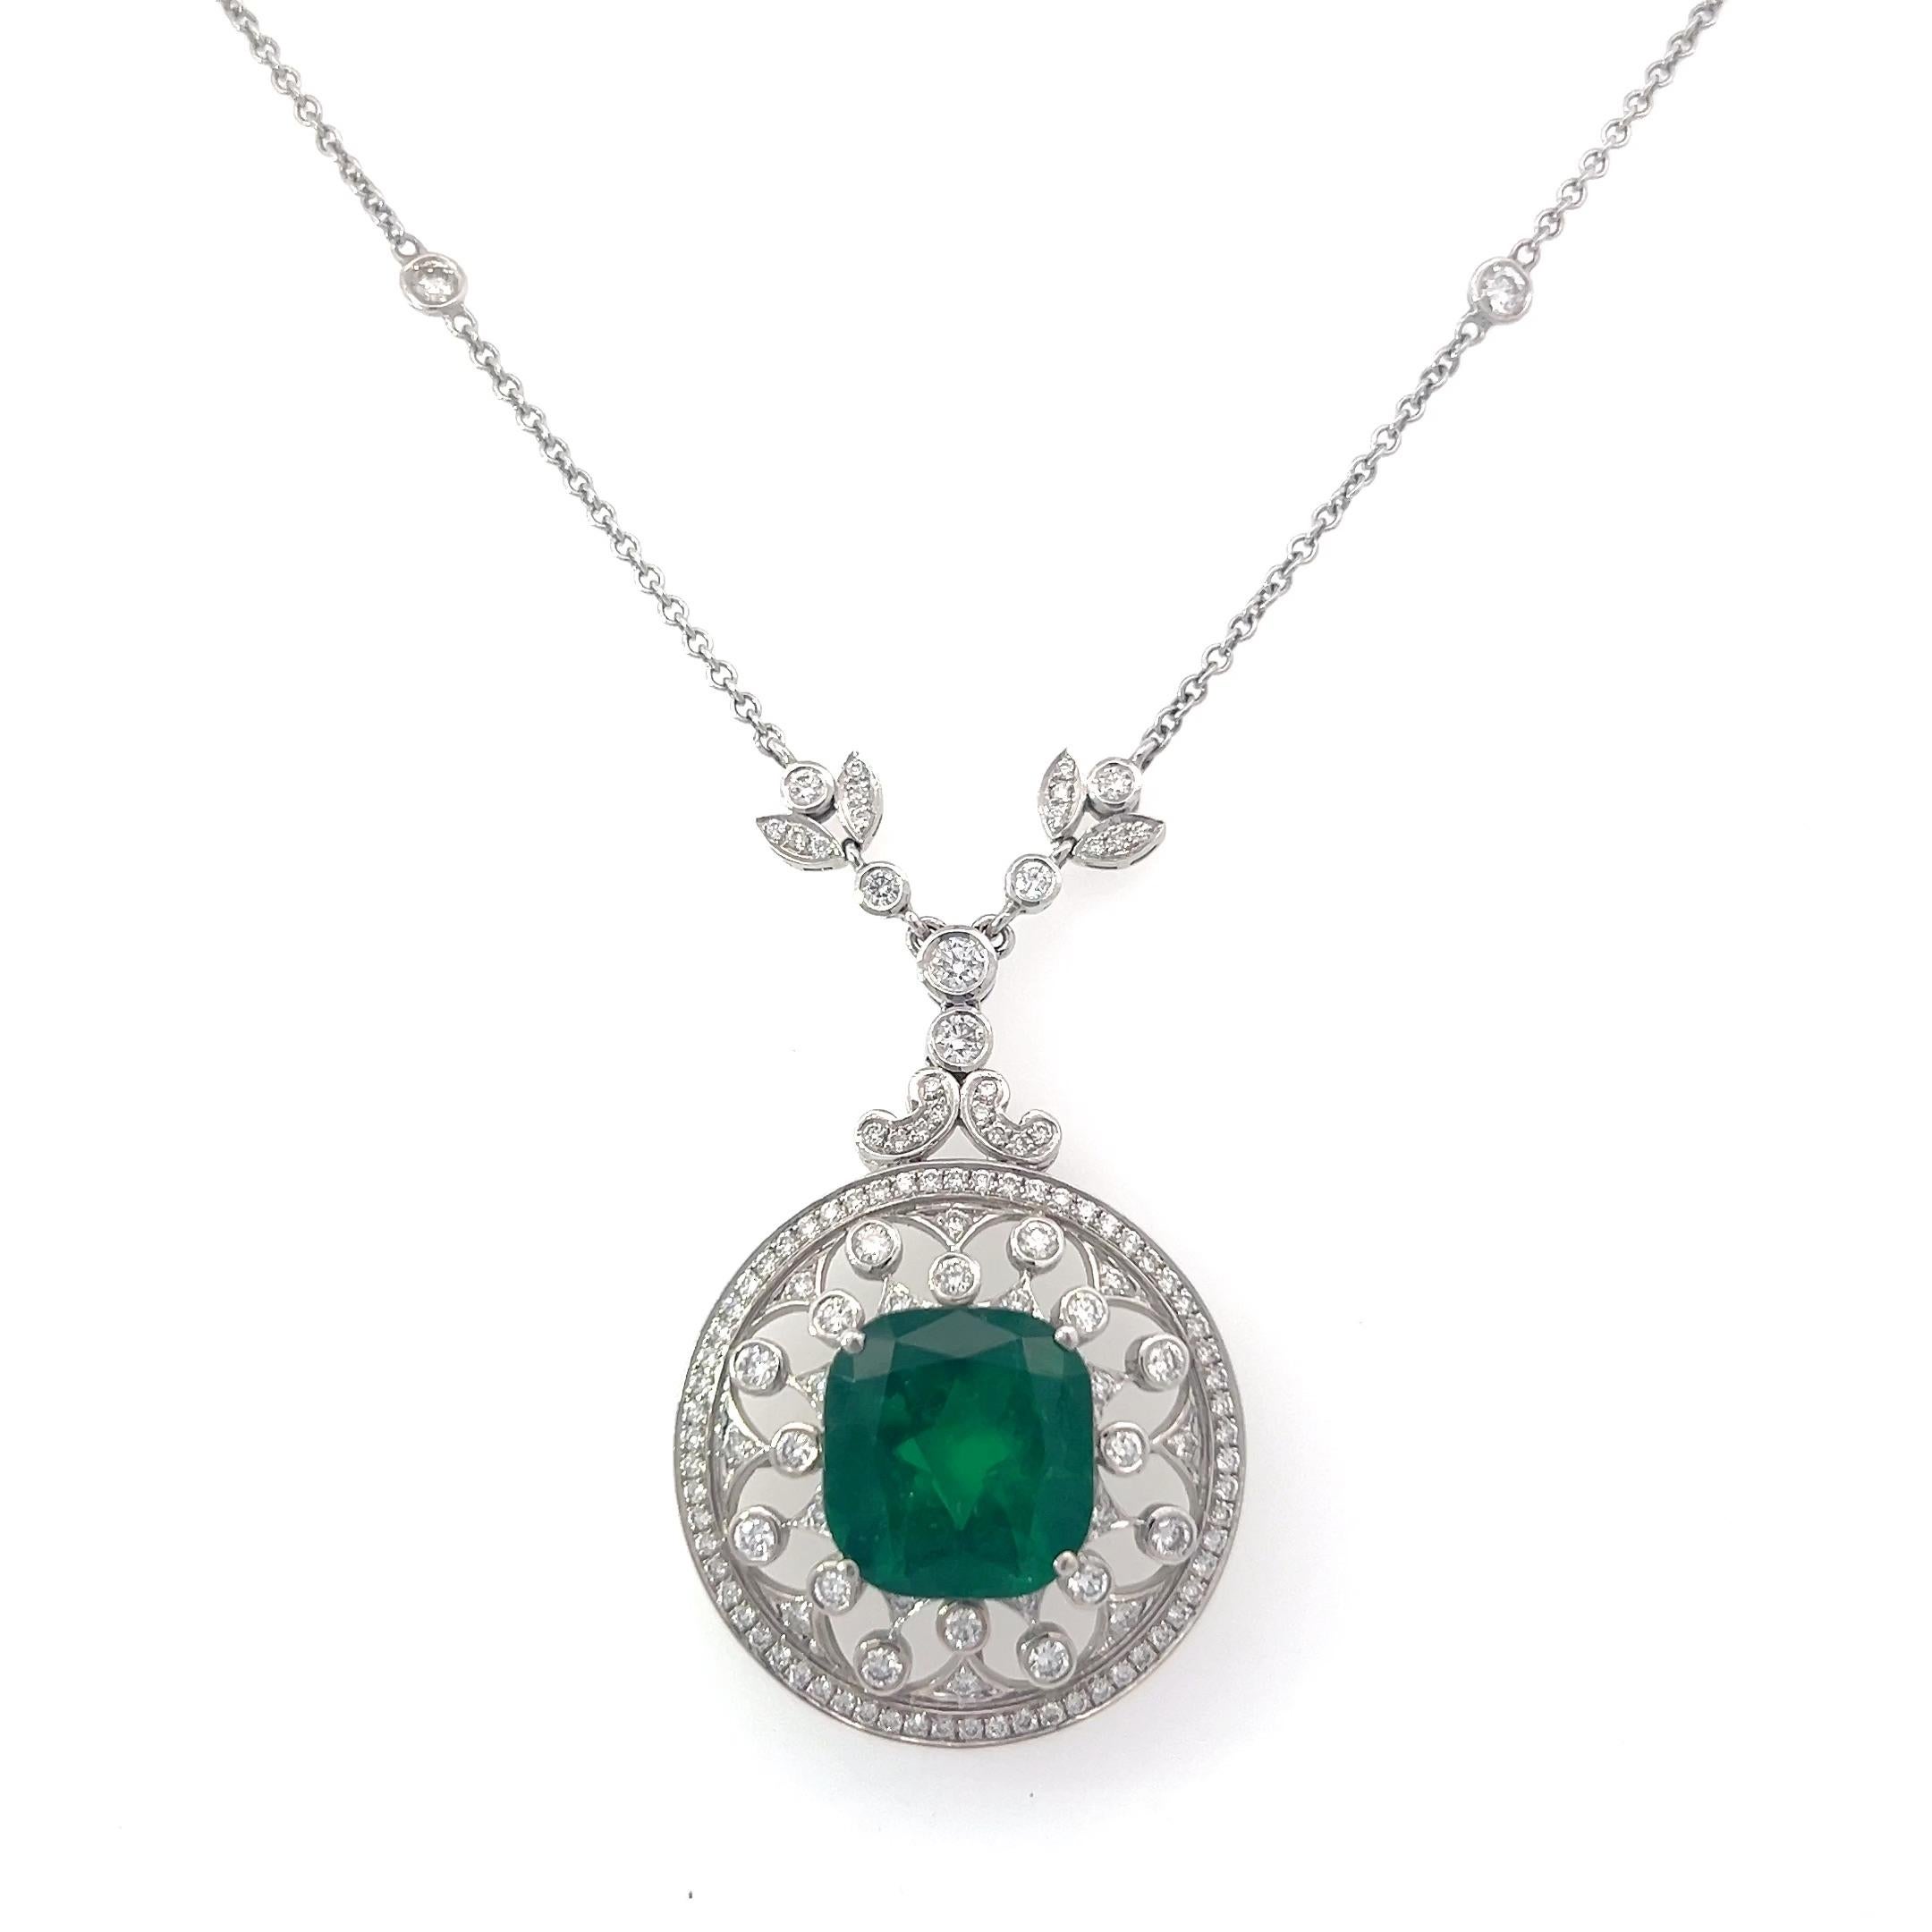 Crafted in 18k white gold and GIA certified, this is a one of a kind emerald and diamond necklace. Featuring a 6.88 carat cushion cut emerald, enhanced with Excel, the only enhancement guaranteed for a lifetime. Set in a floral inspired handmade